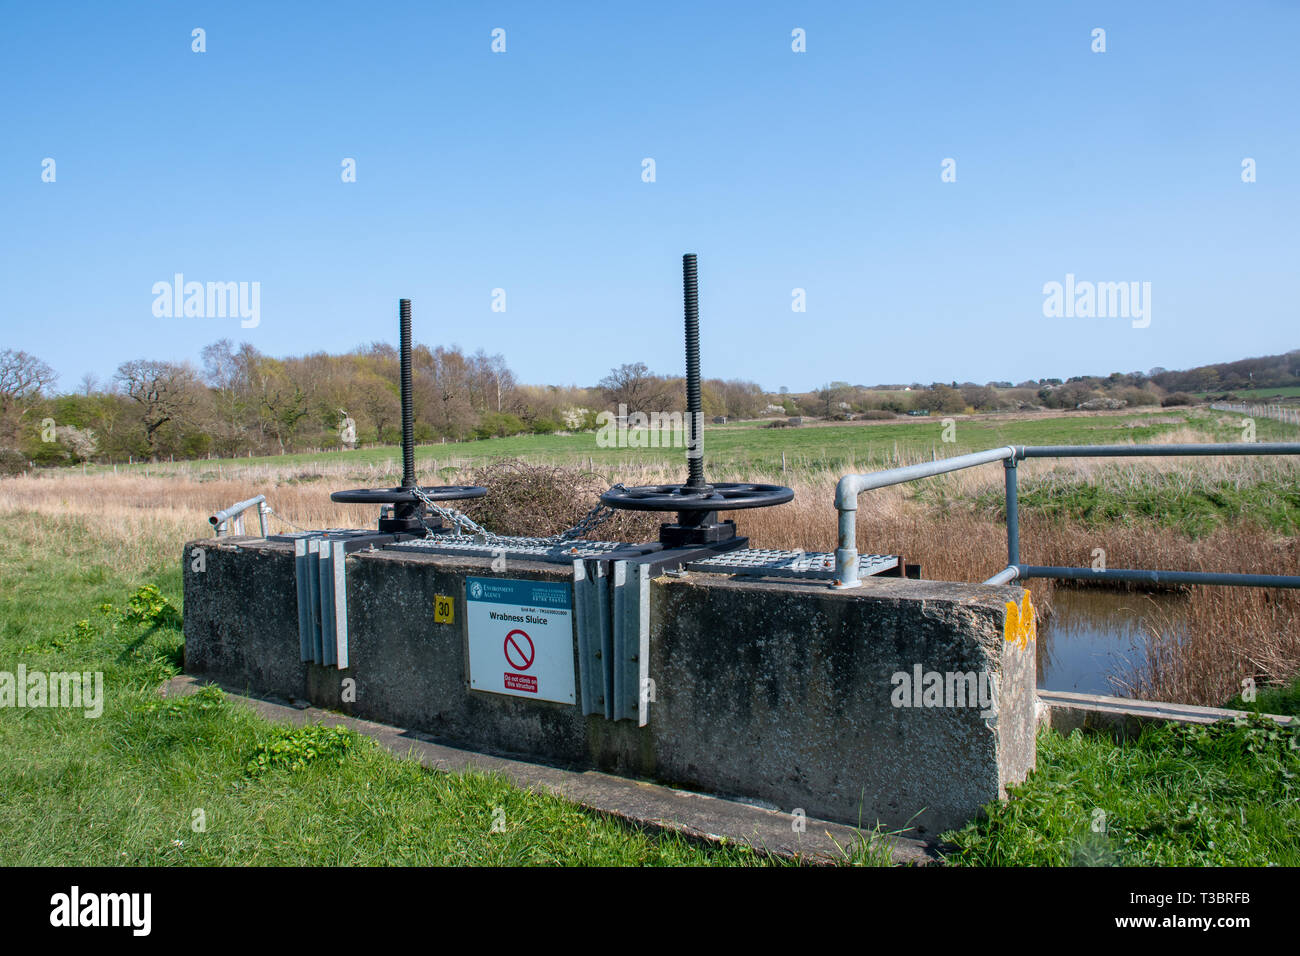 Wrabness Suffolk Uk  - 1 April  2019:  Flood control sluice used for water management on flood plain Stock Photo